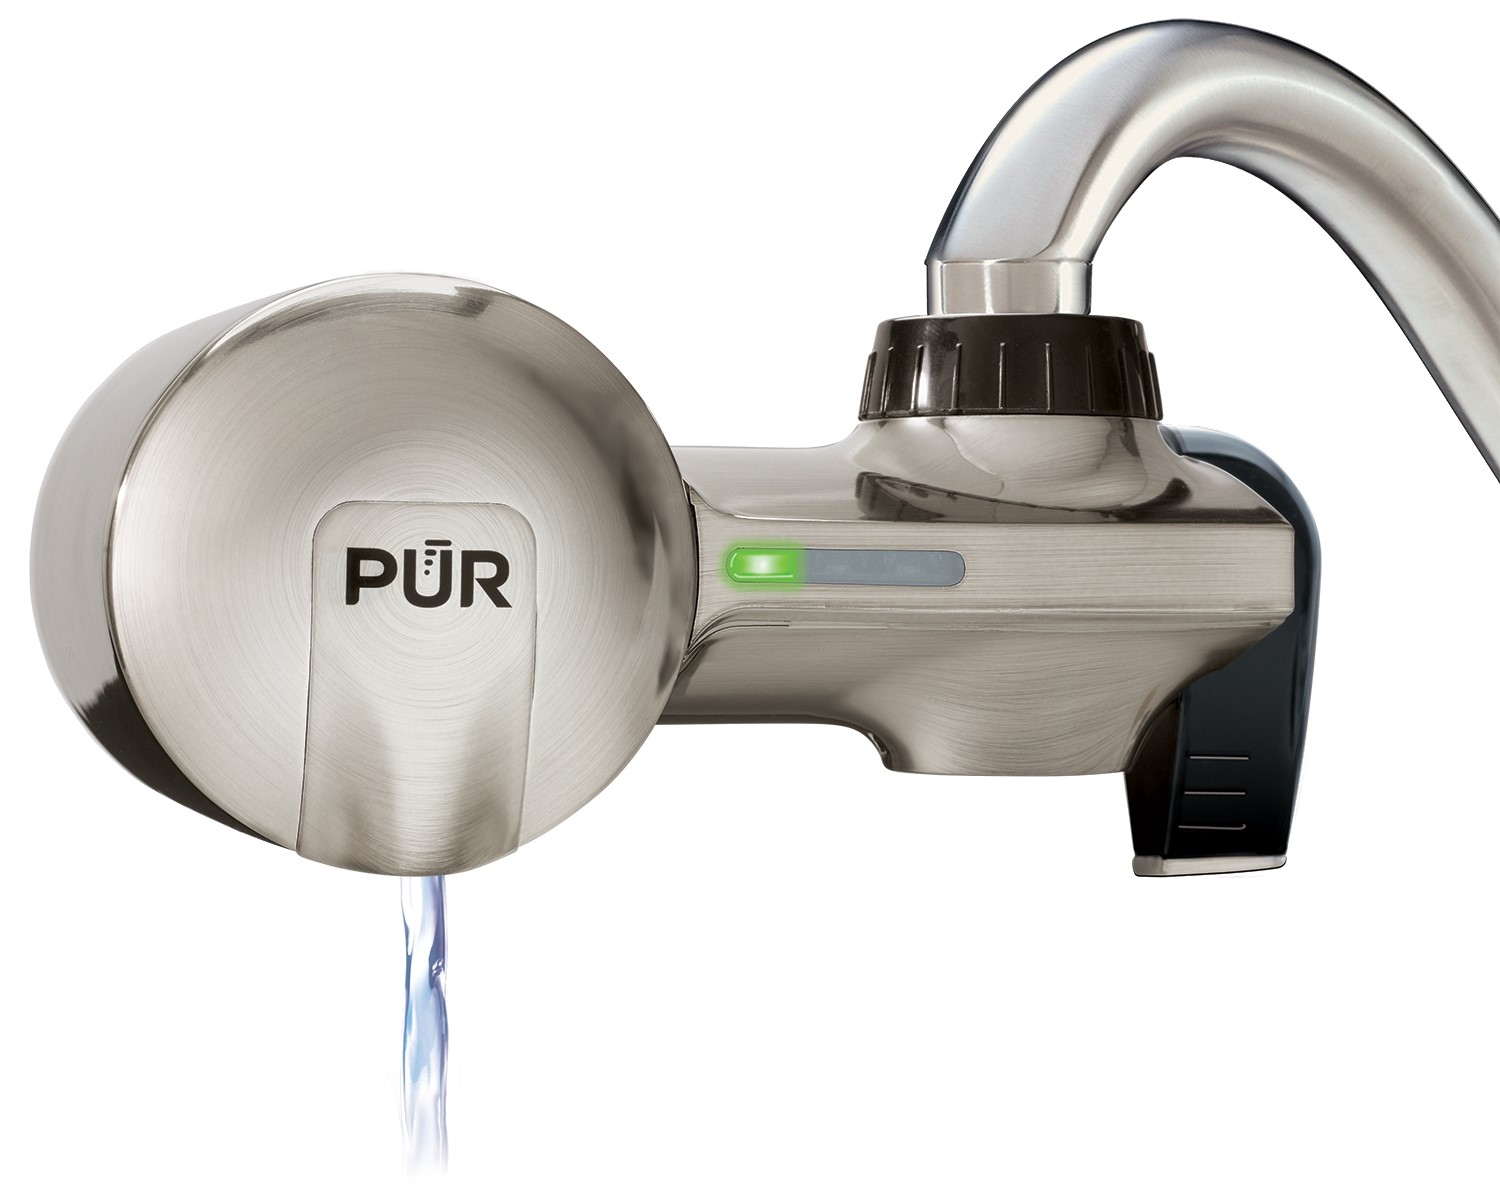 PUR PLUS Faucet Mount Water Filtration System, Stainless Steel Style, PFM450S - image 1 of 11